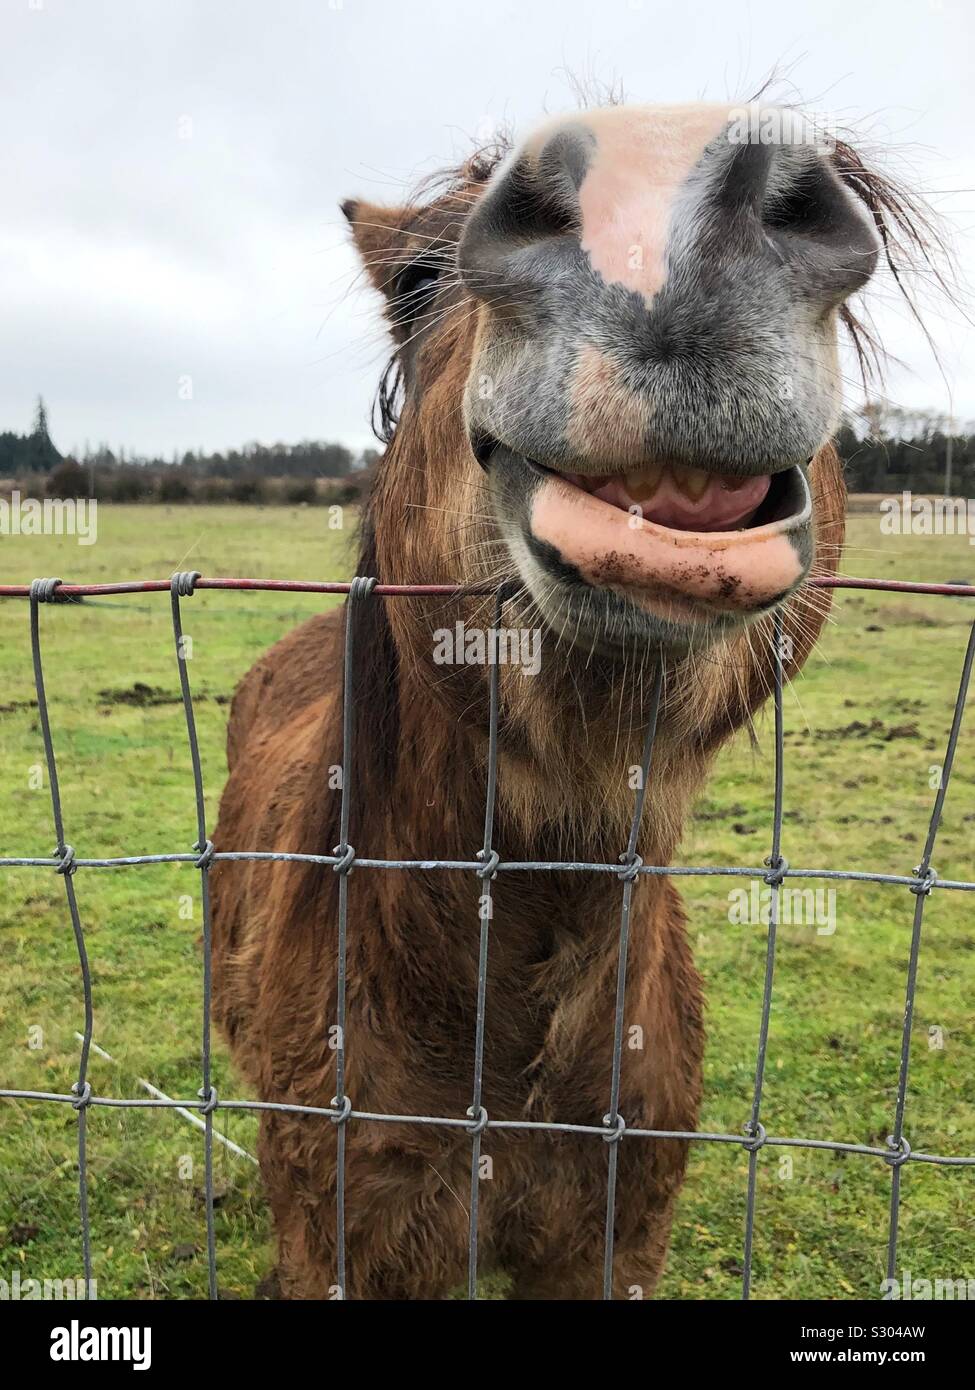 A horse making a funny face. Stock Photo